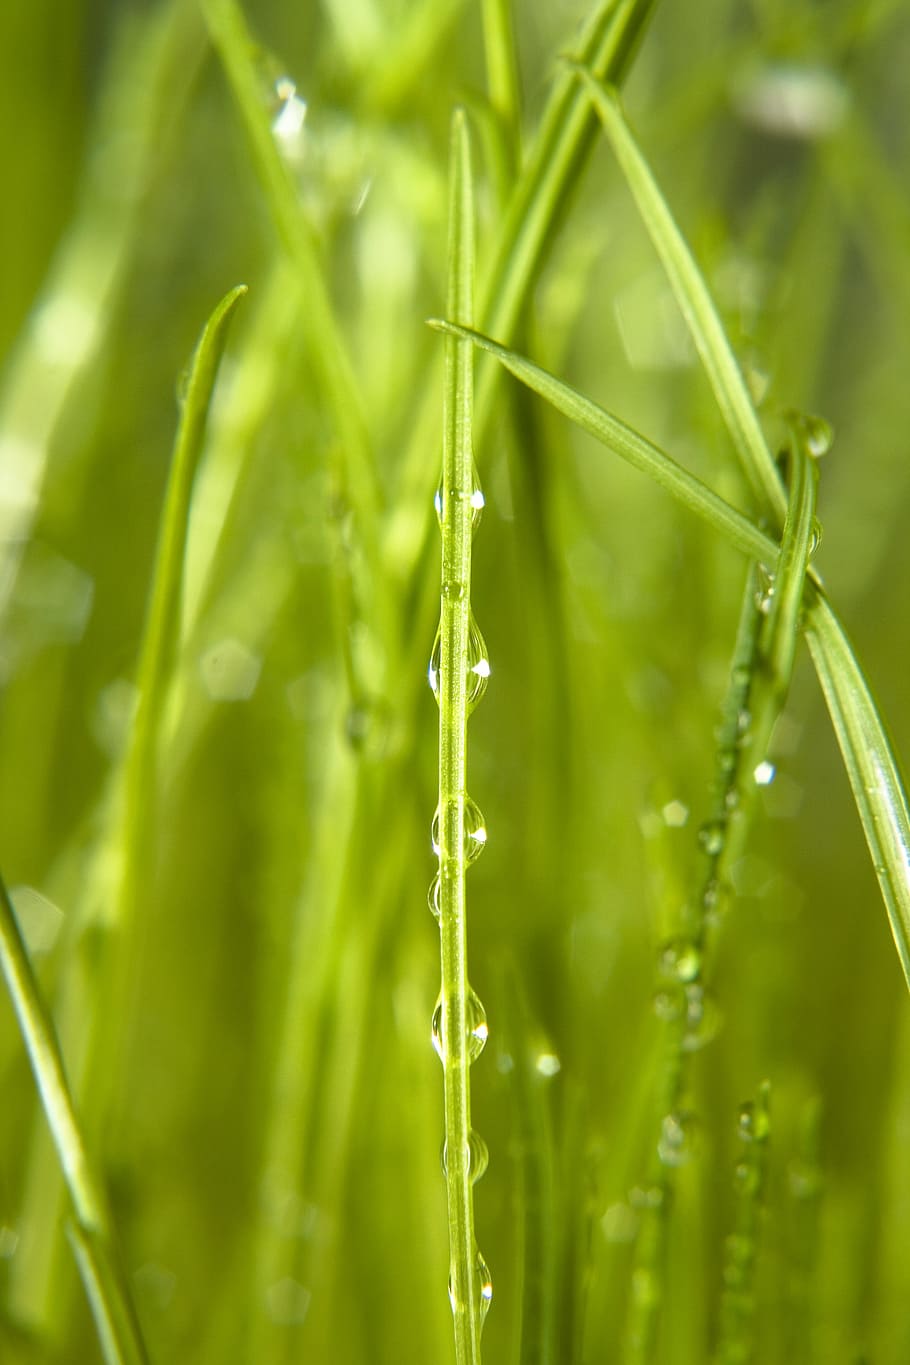 background, grass, wet, green, close, rain, spring, eco, water, meadow